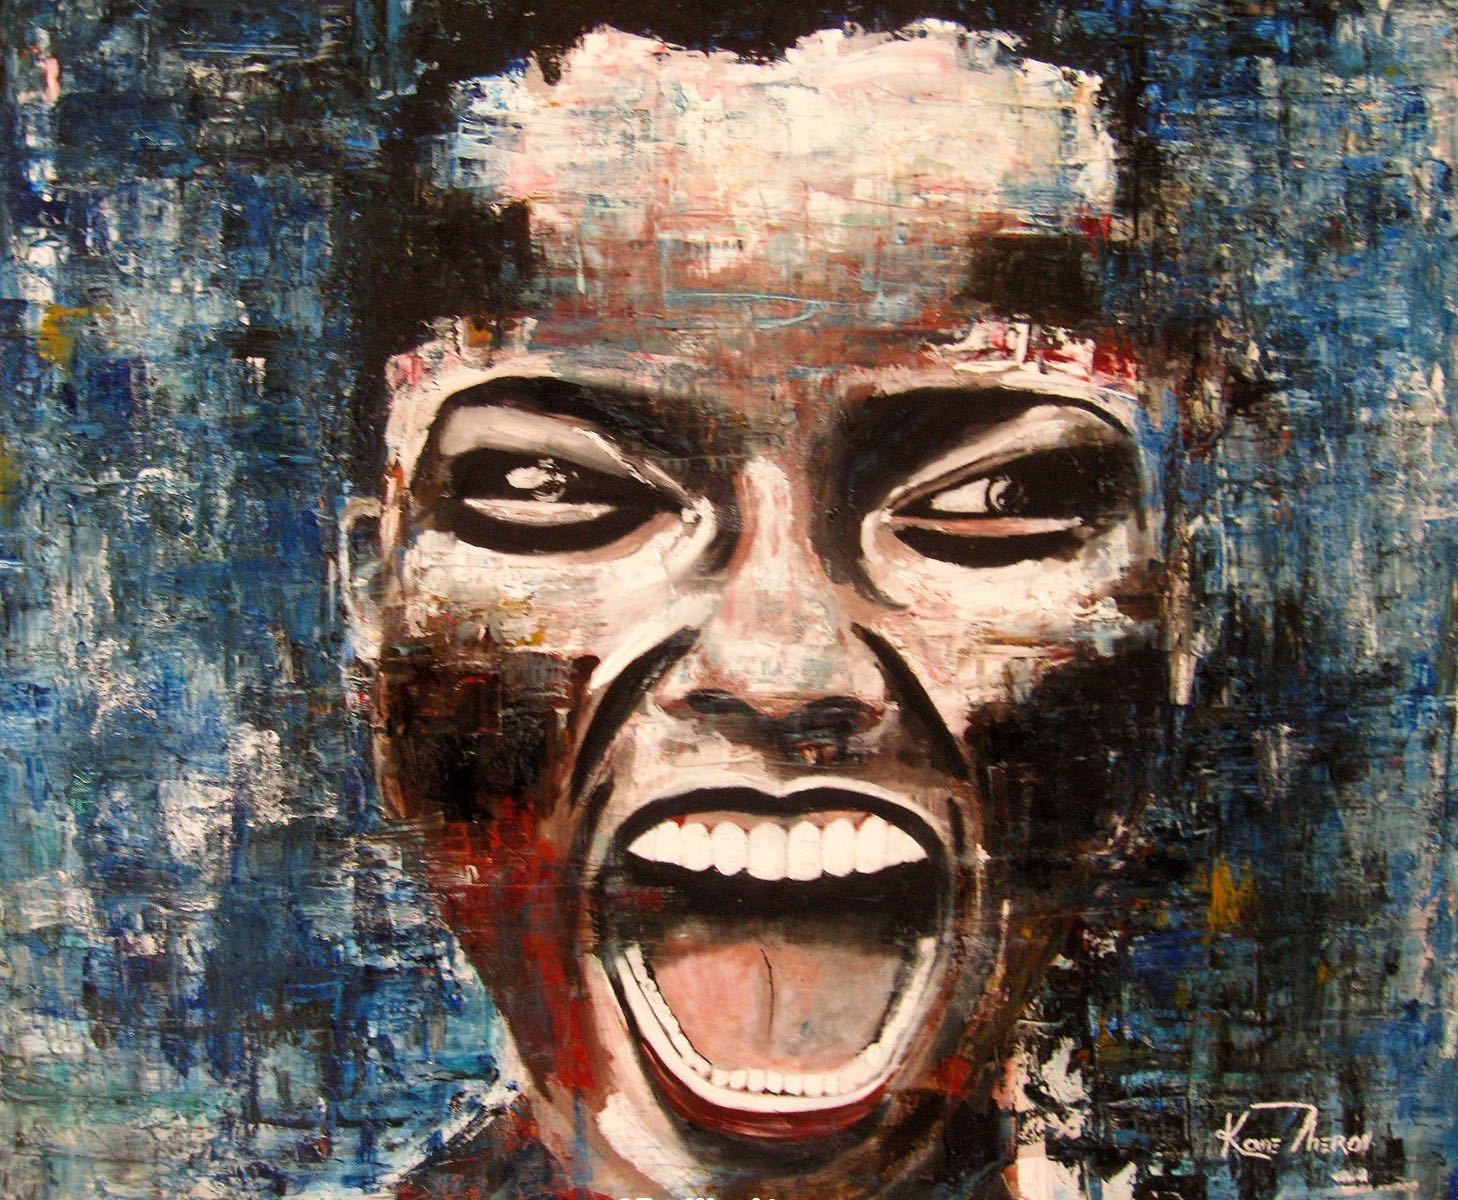 Kowie Theron  |  South Africa  |  "Pure Joy"  |  Print  |  True African Art .com